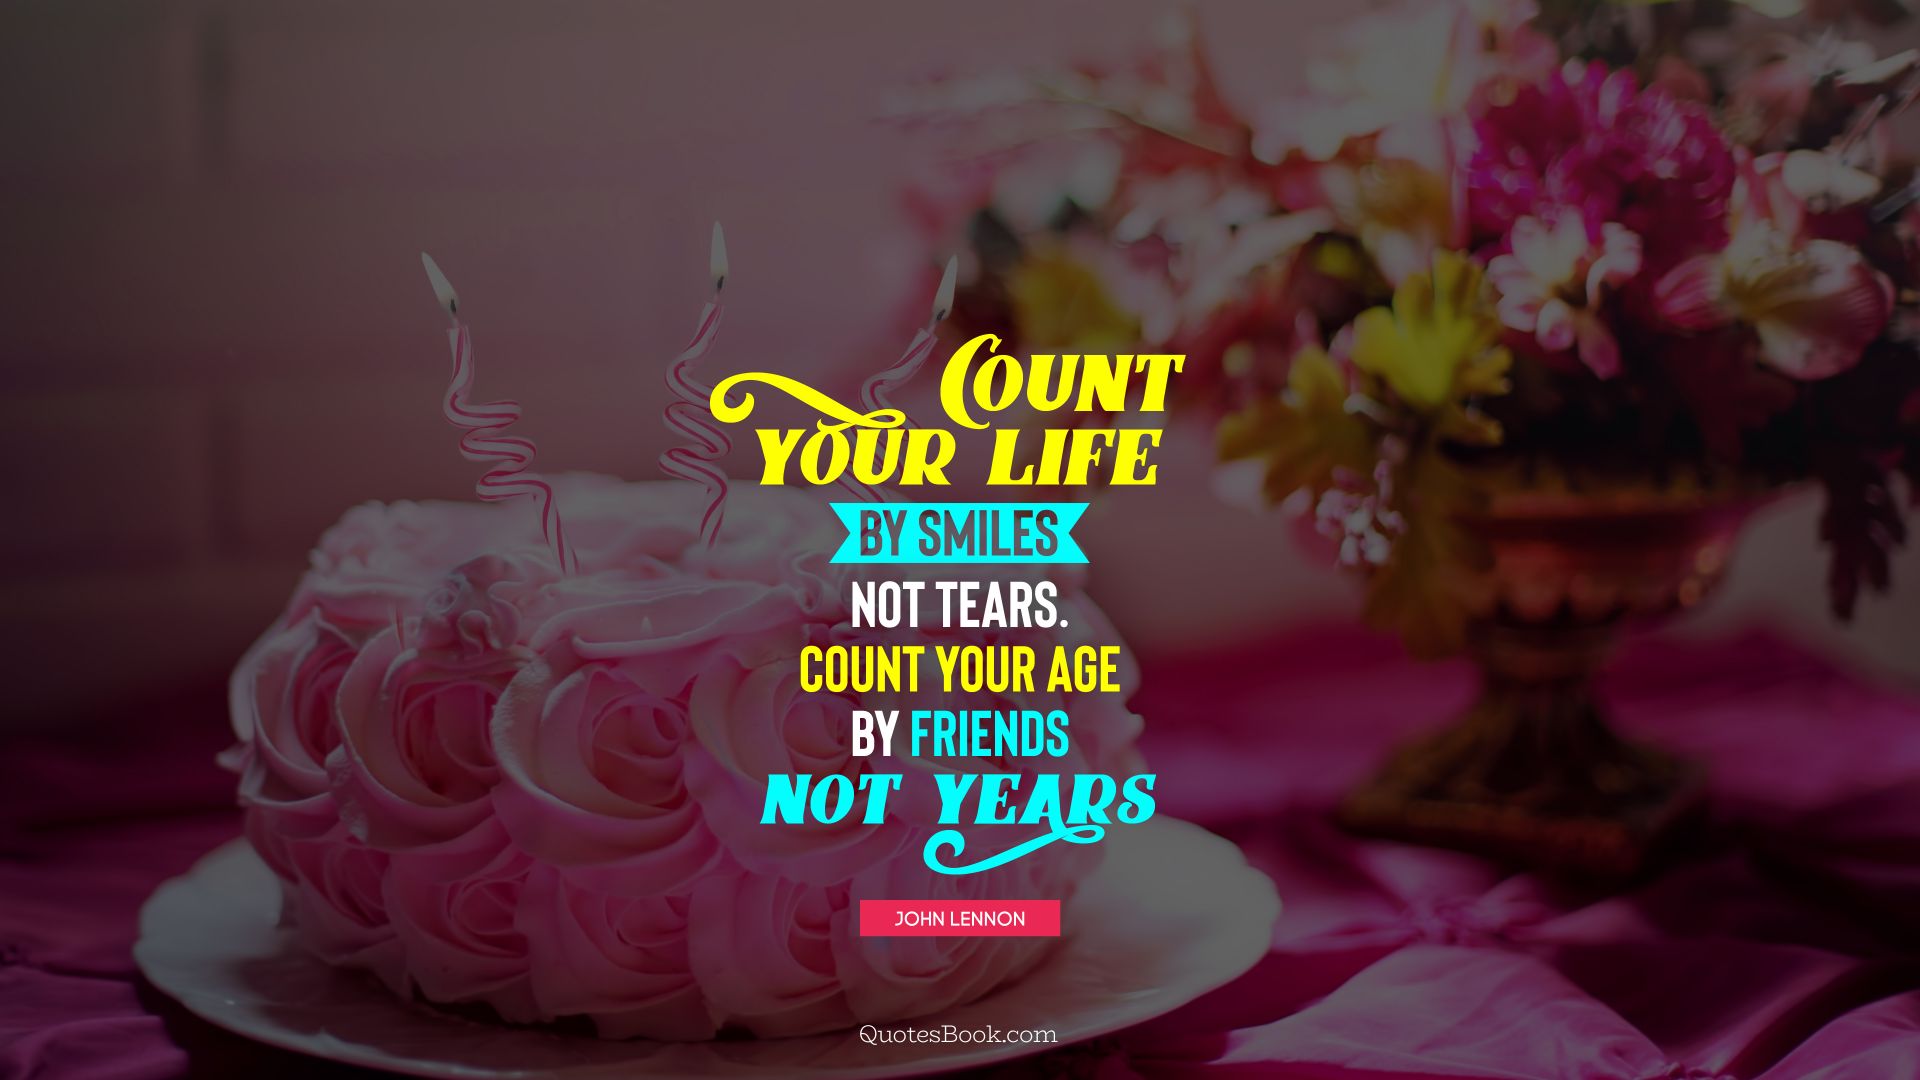 Count your life by smiles not tears. Count your age by friends not years. - Quote by John Lennon